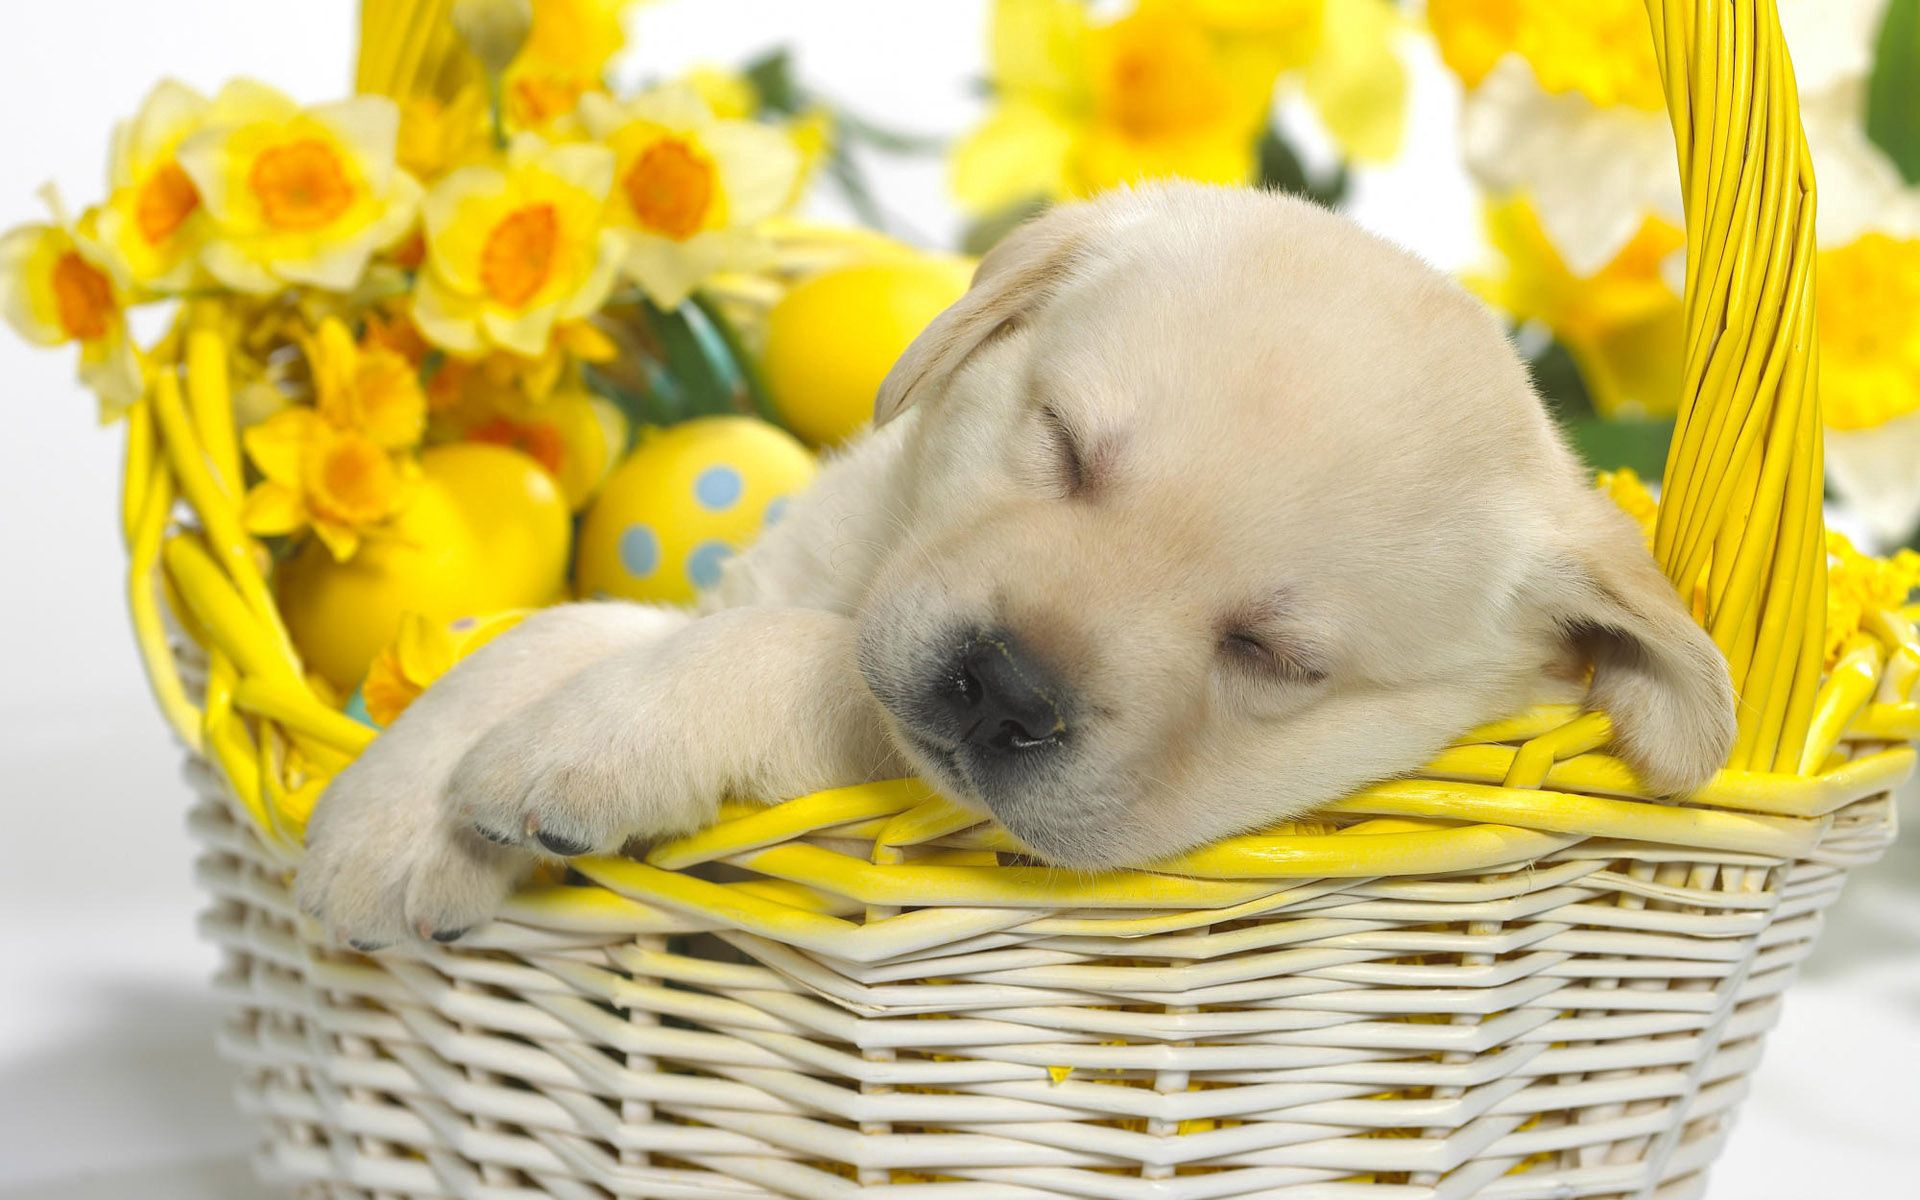 58117 download wallpaper animals, flowers, easter, puppy, sleep, dream, basket screensavers and pictures for free